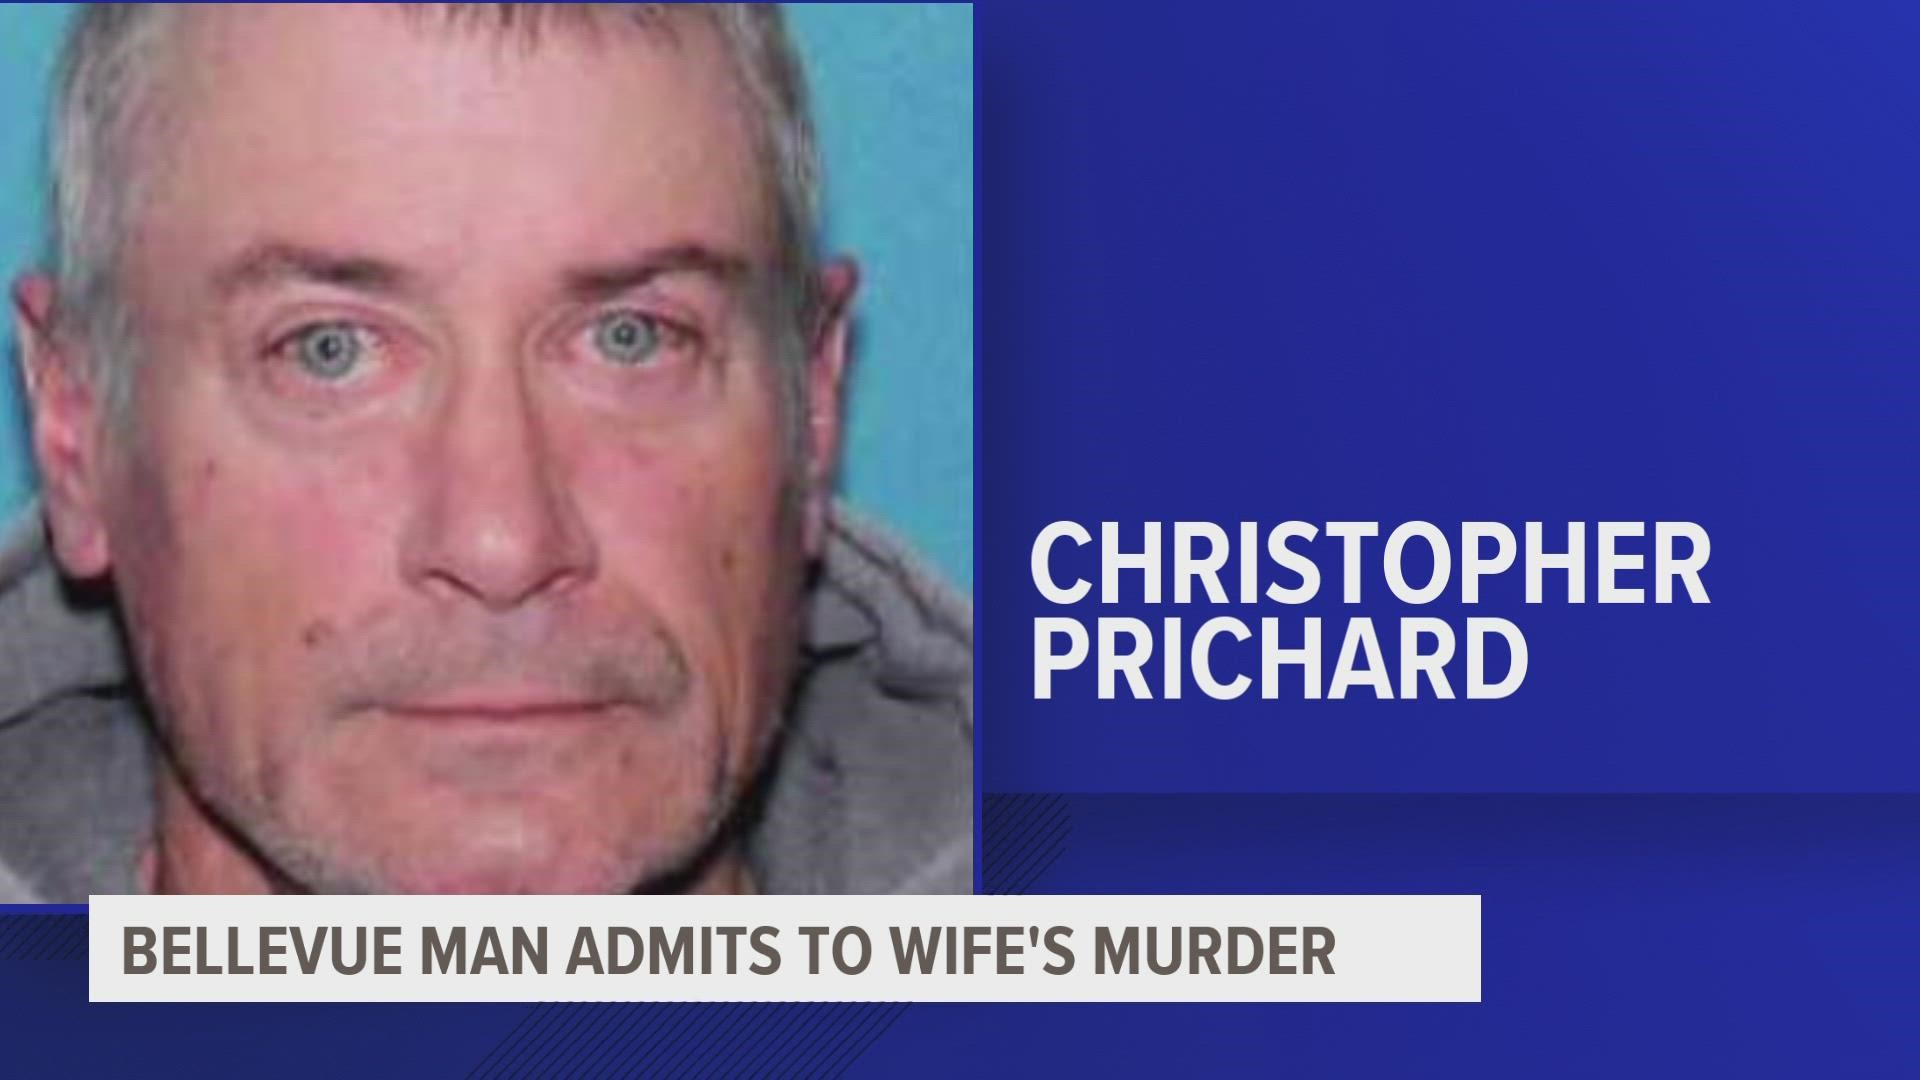 56-year-old Christopher E. Prichard has been charged with first-degree murder after he admitted to law enforcement that he shot his wife, then left the scene.